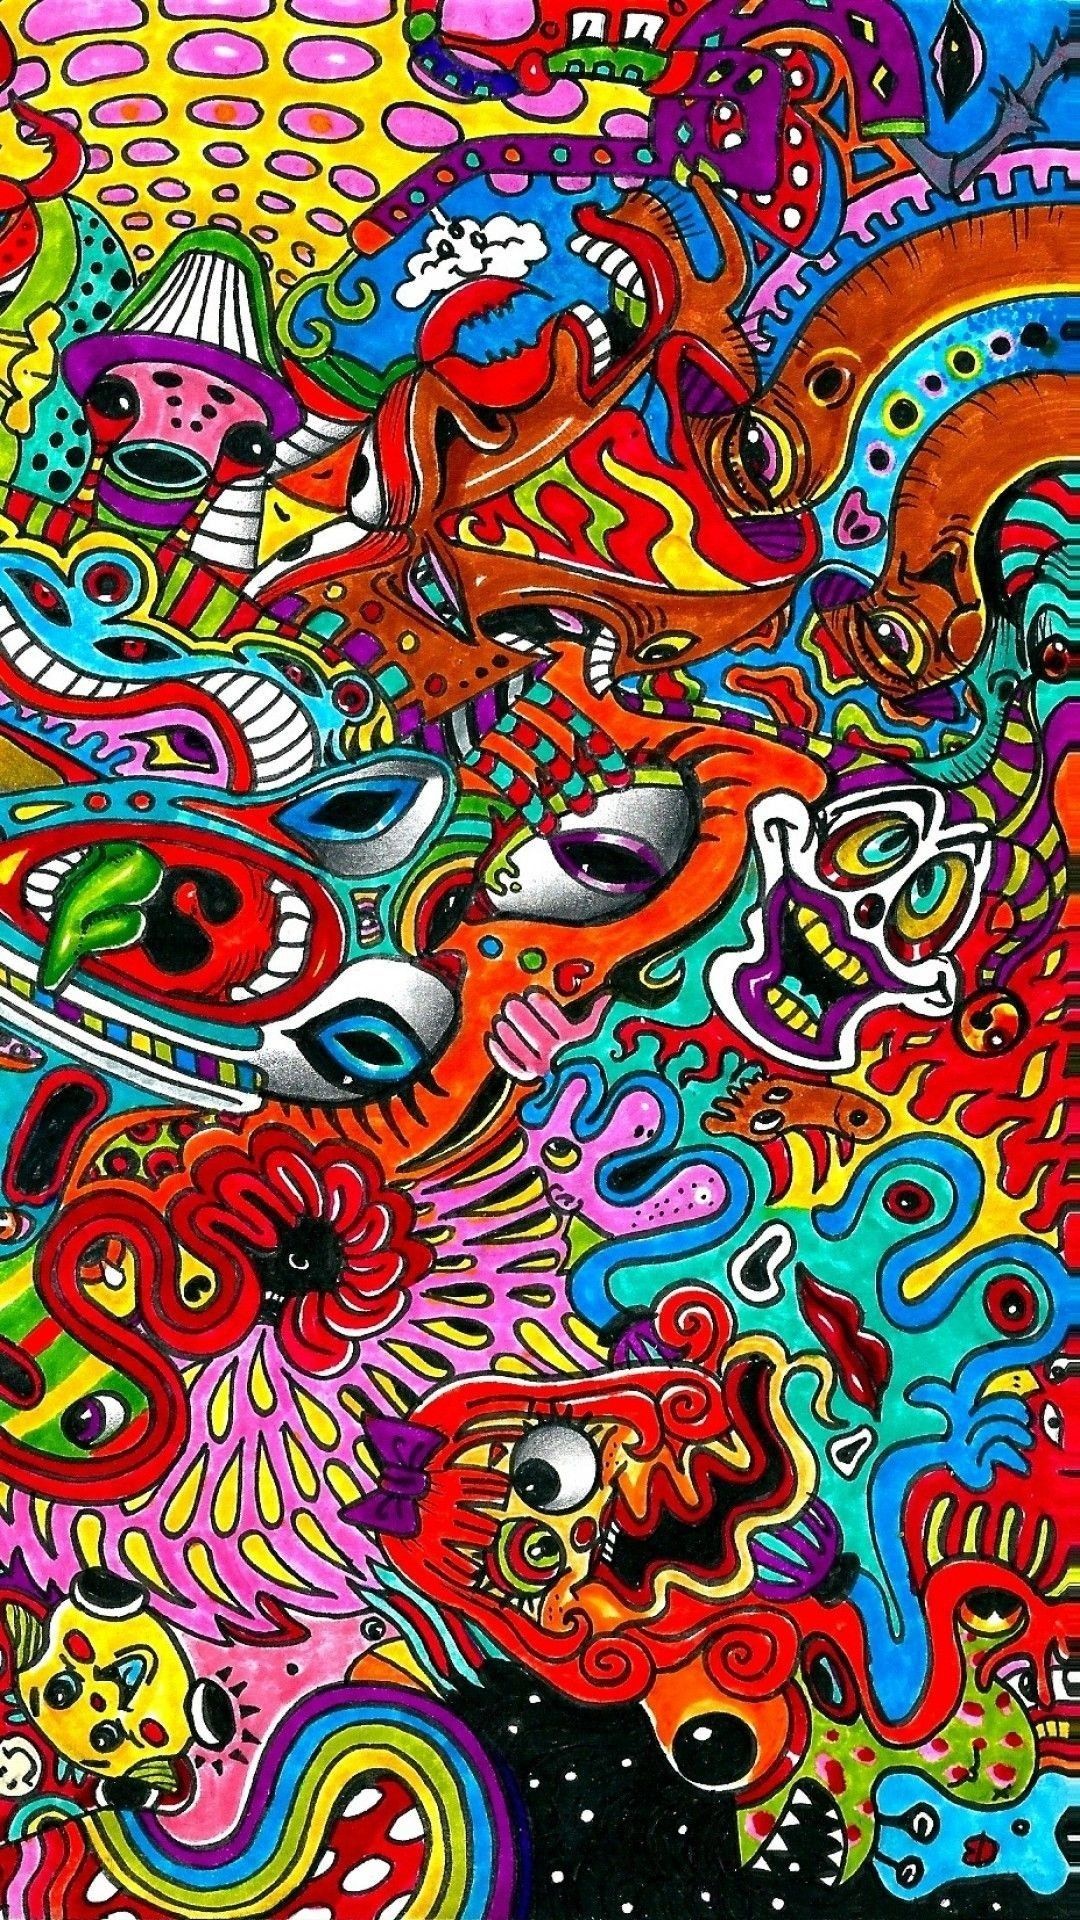 A psychedelic artwork with many different colors - Trippy